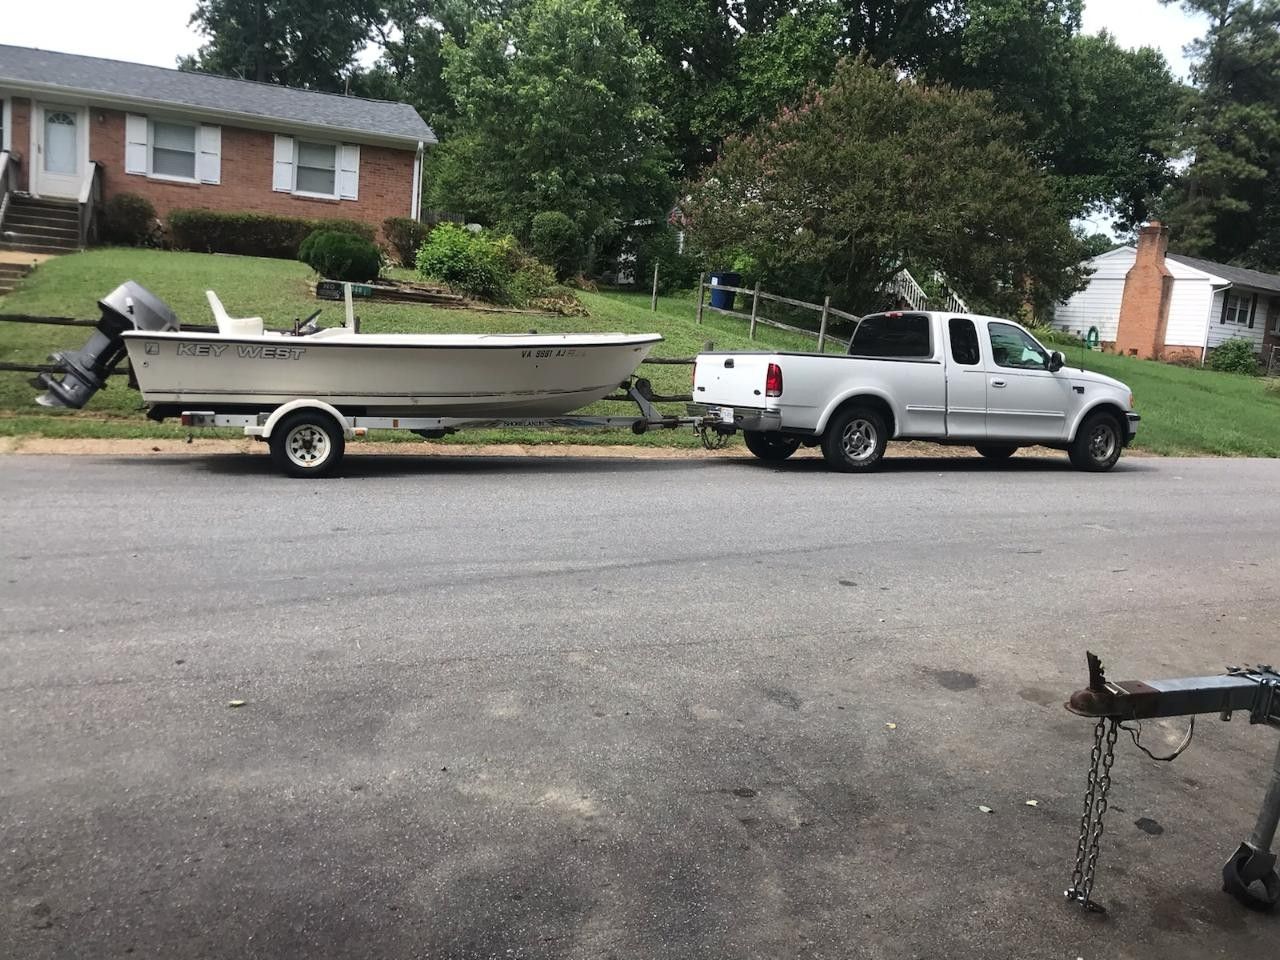 93 key West boat and trailer